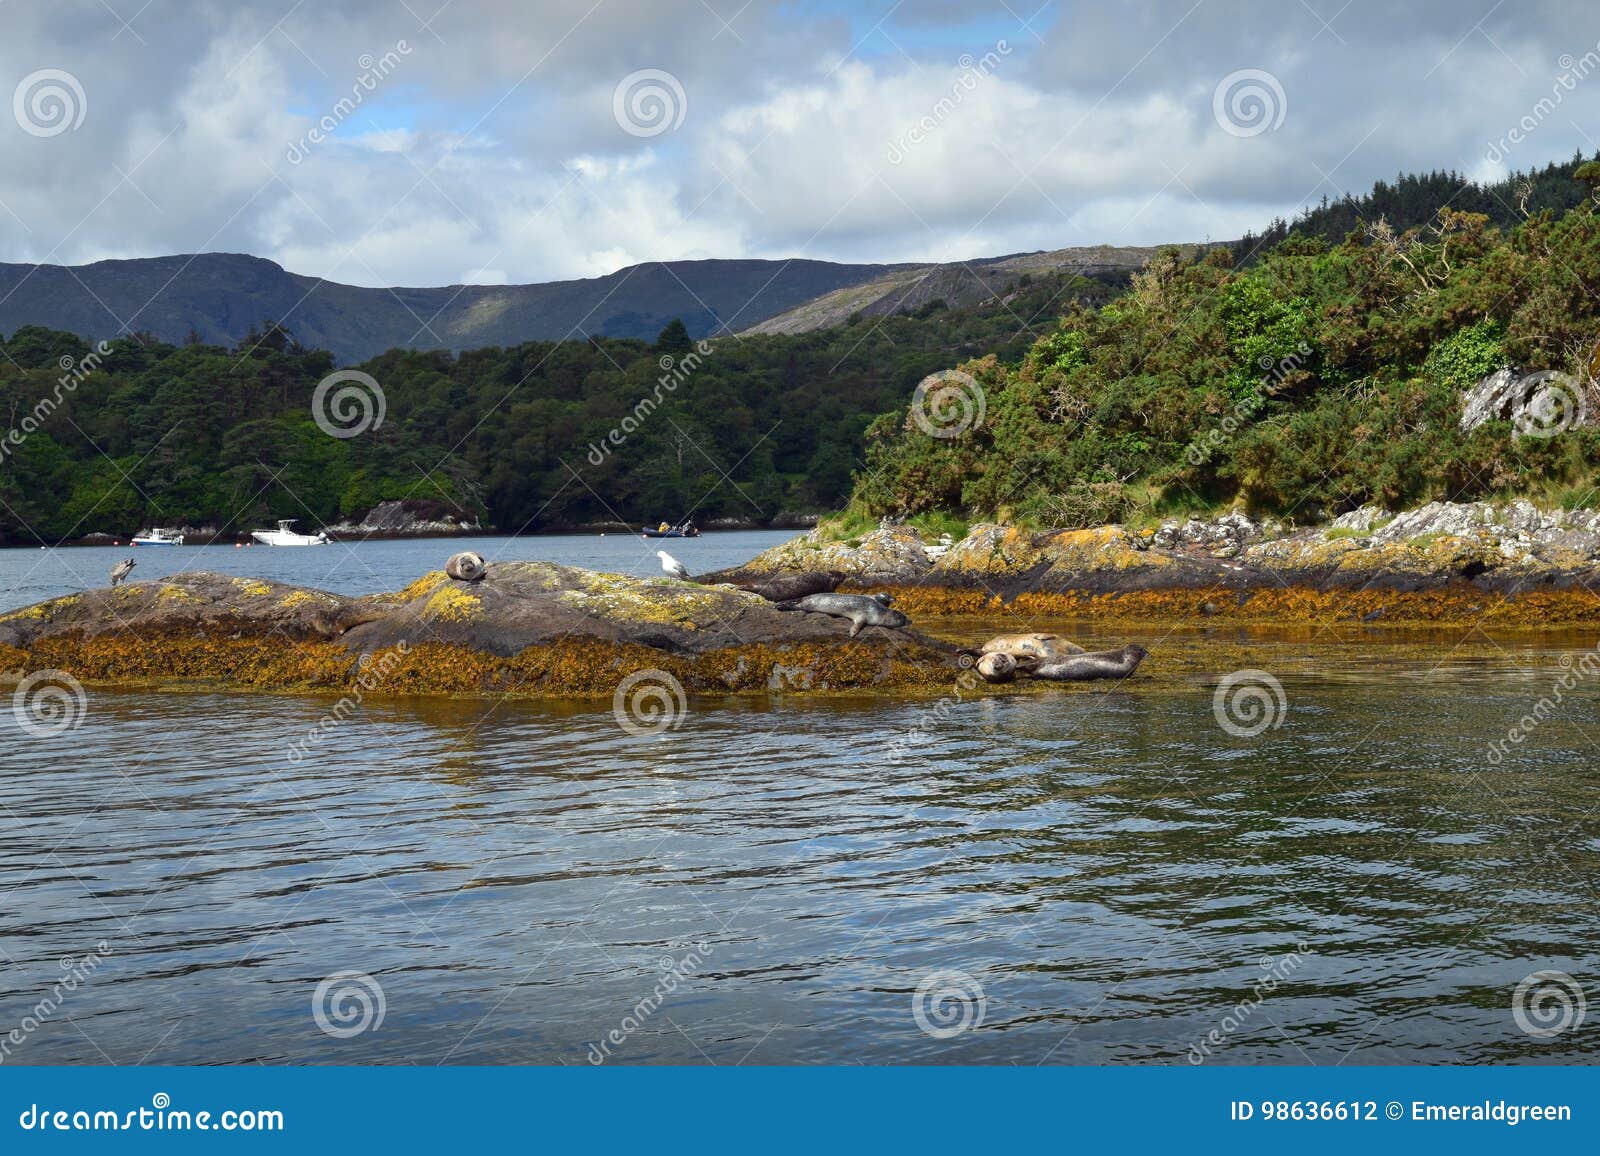 seals in bantry bay